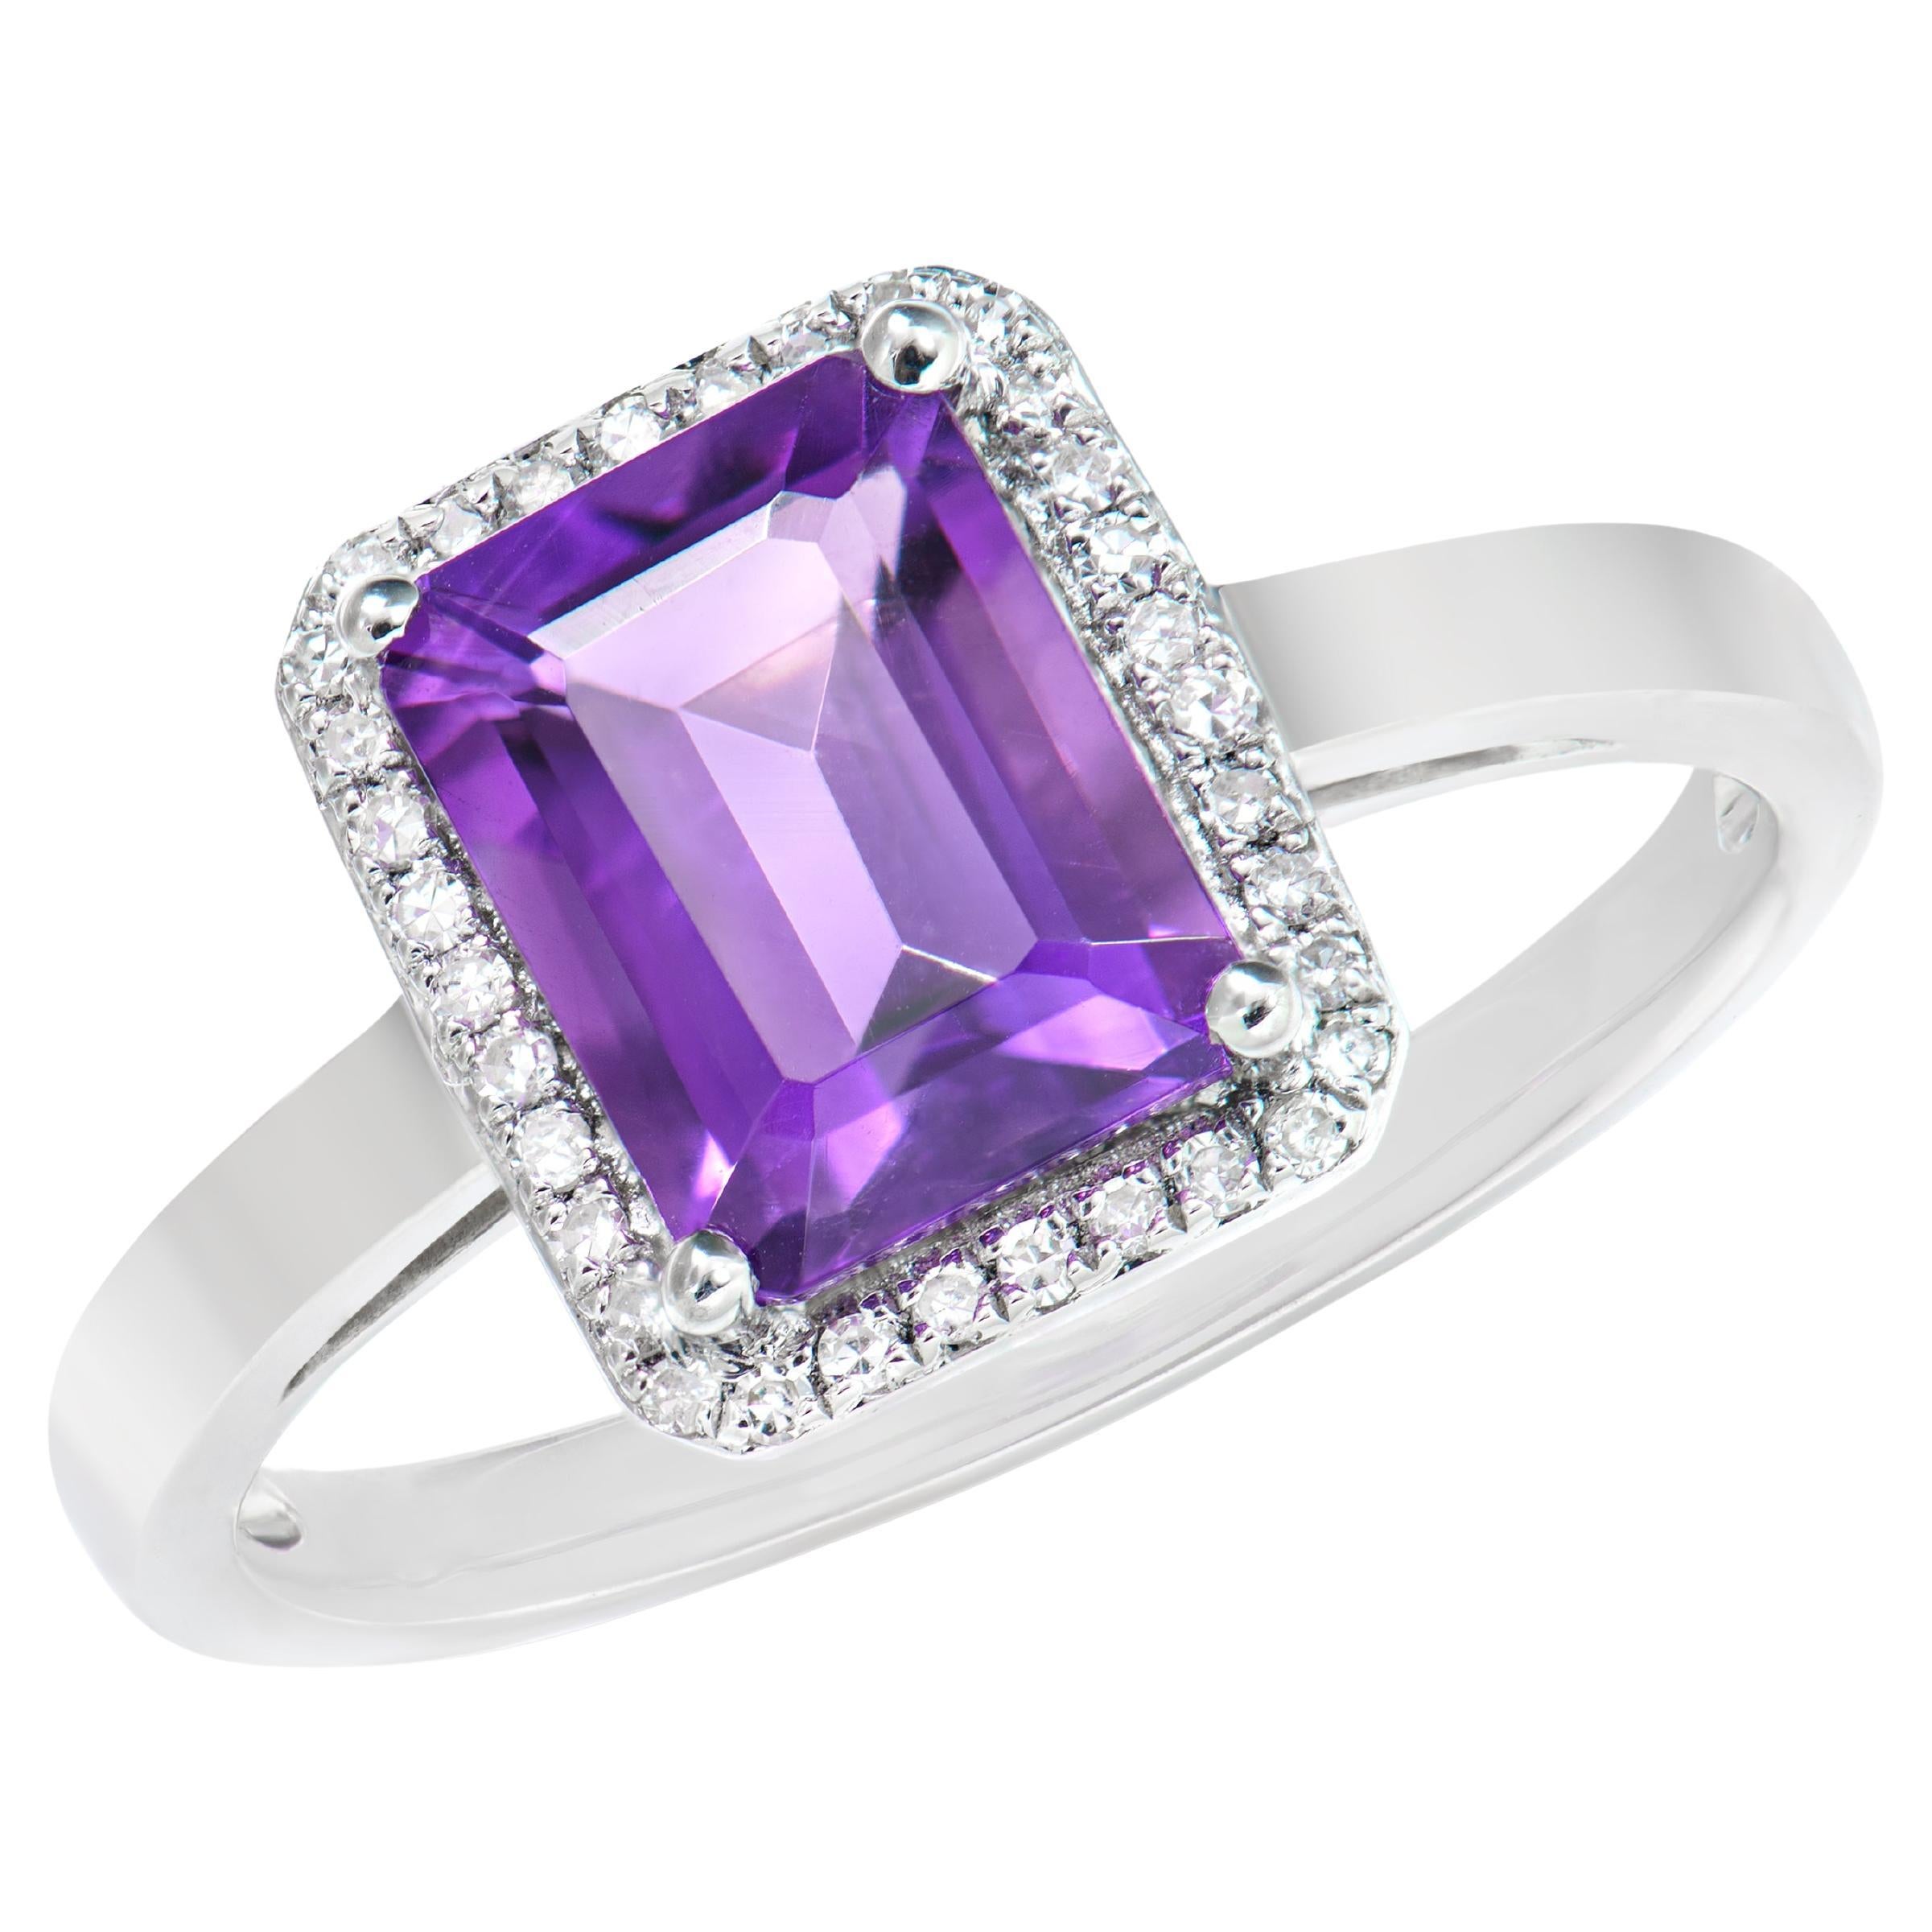 1.40 Carat Amethyst Fancy Ring in 18Karat White Gold with White Diamond.   For Sale